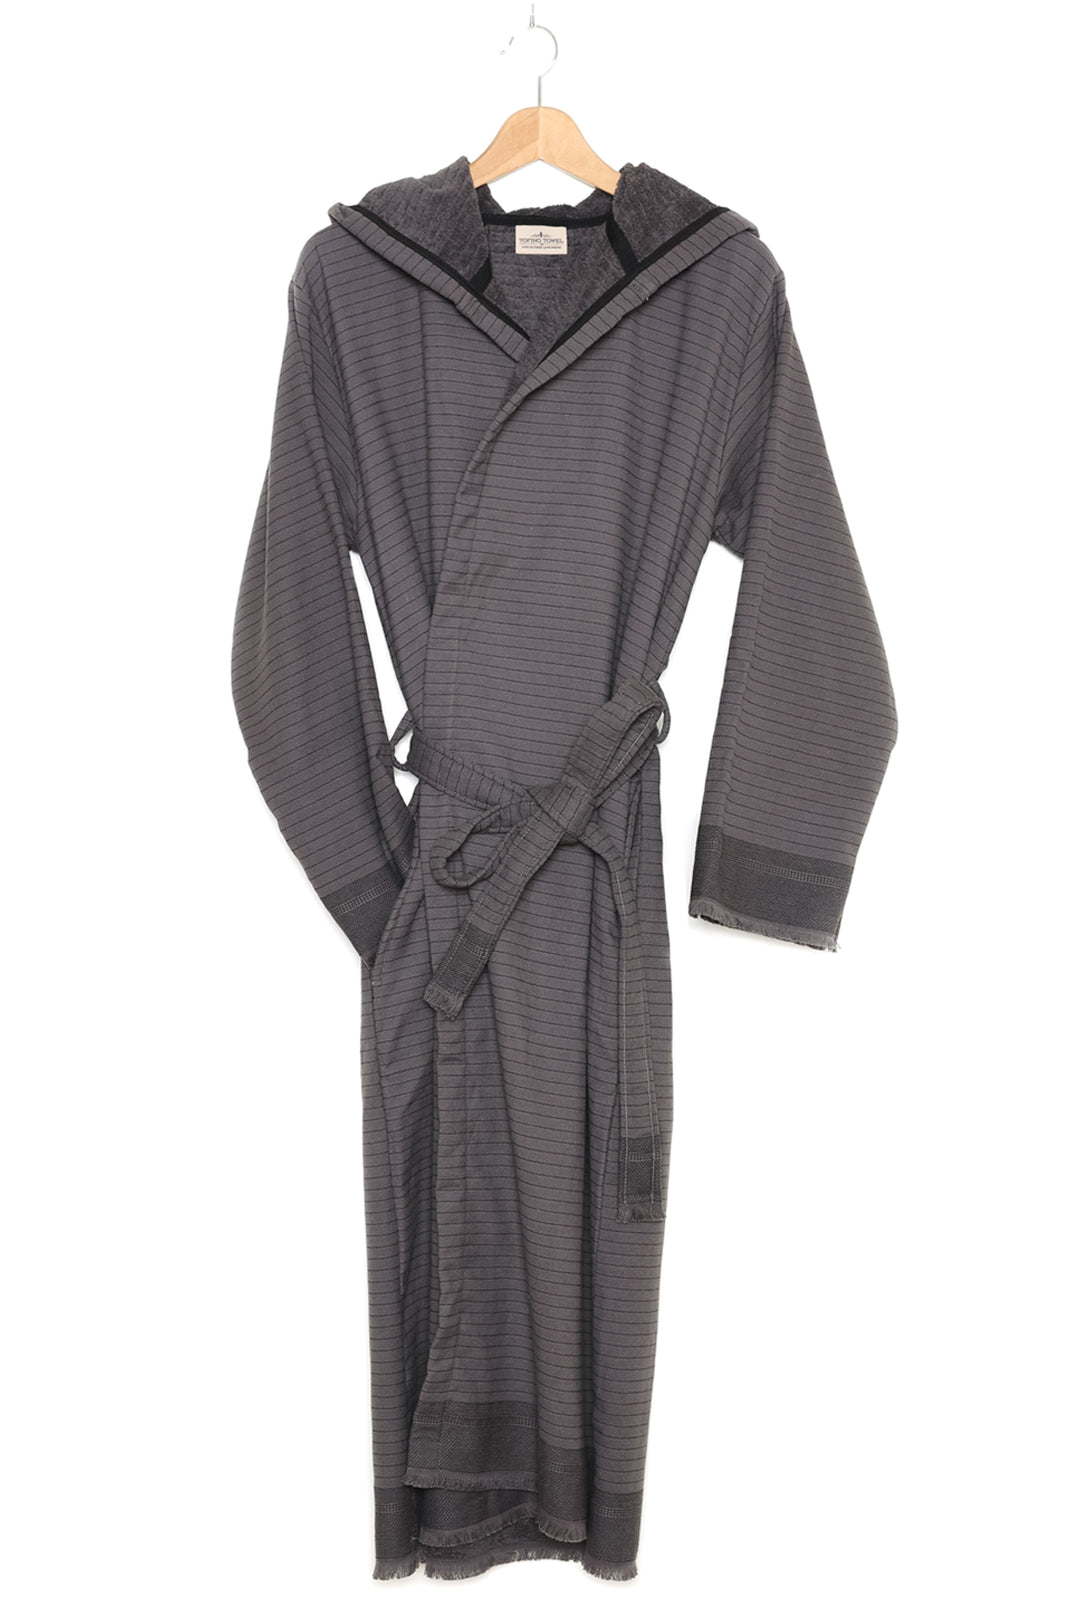 THE SILAS <br> Hooded Terry Robe Series